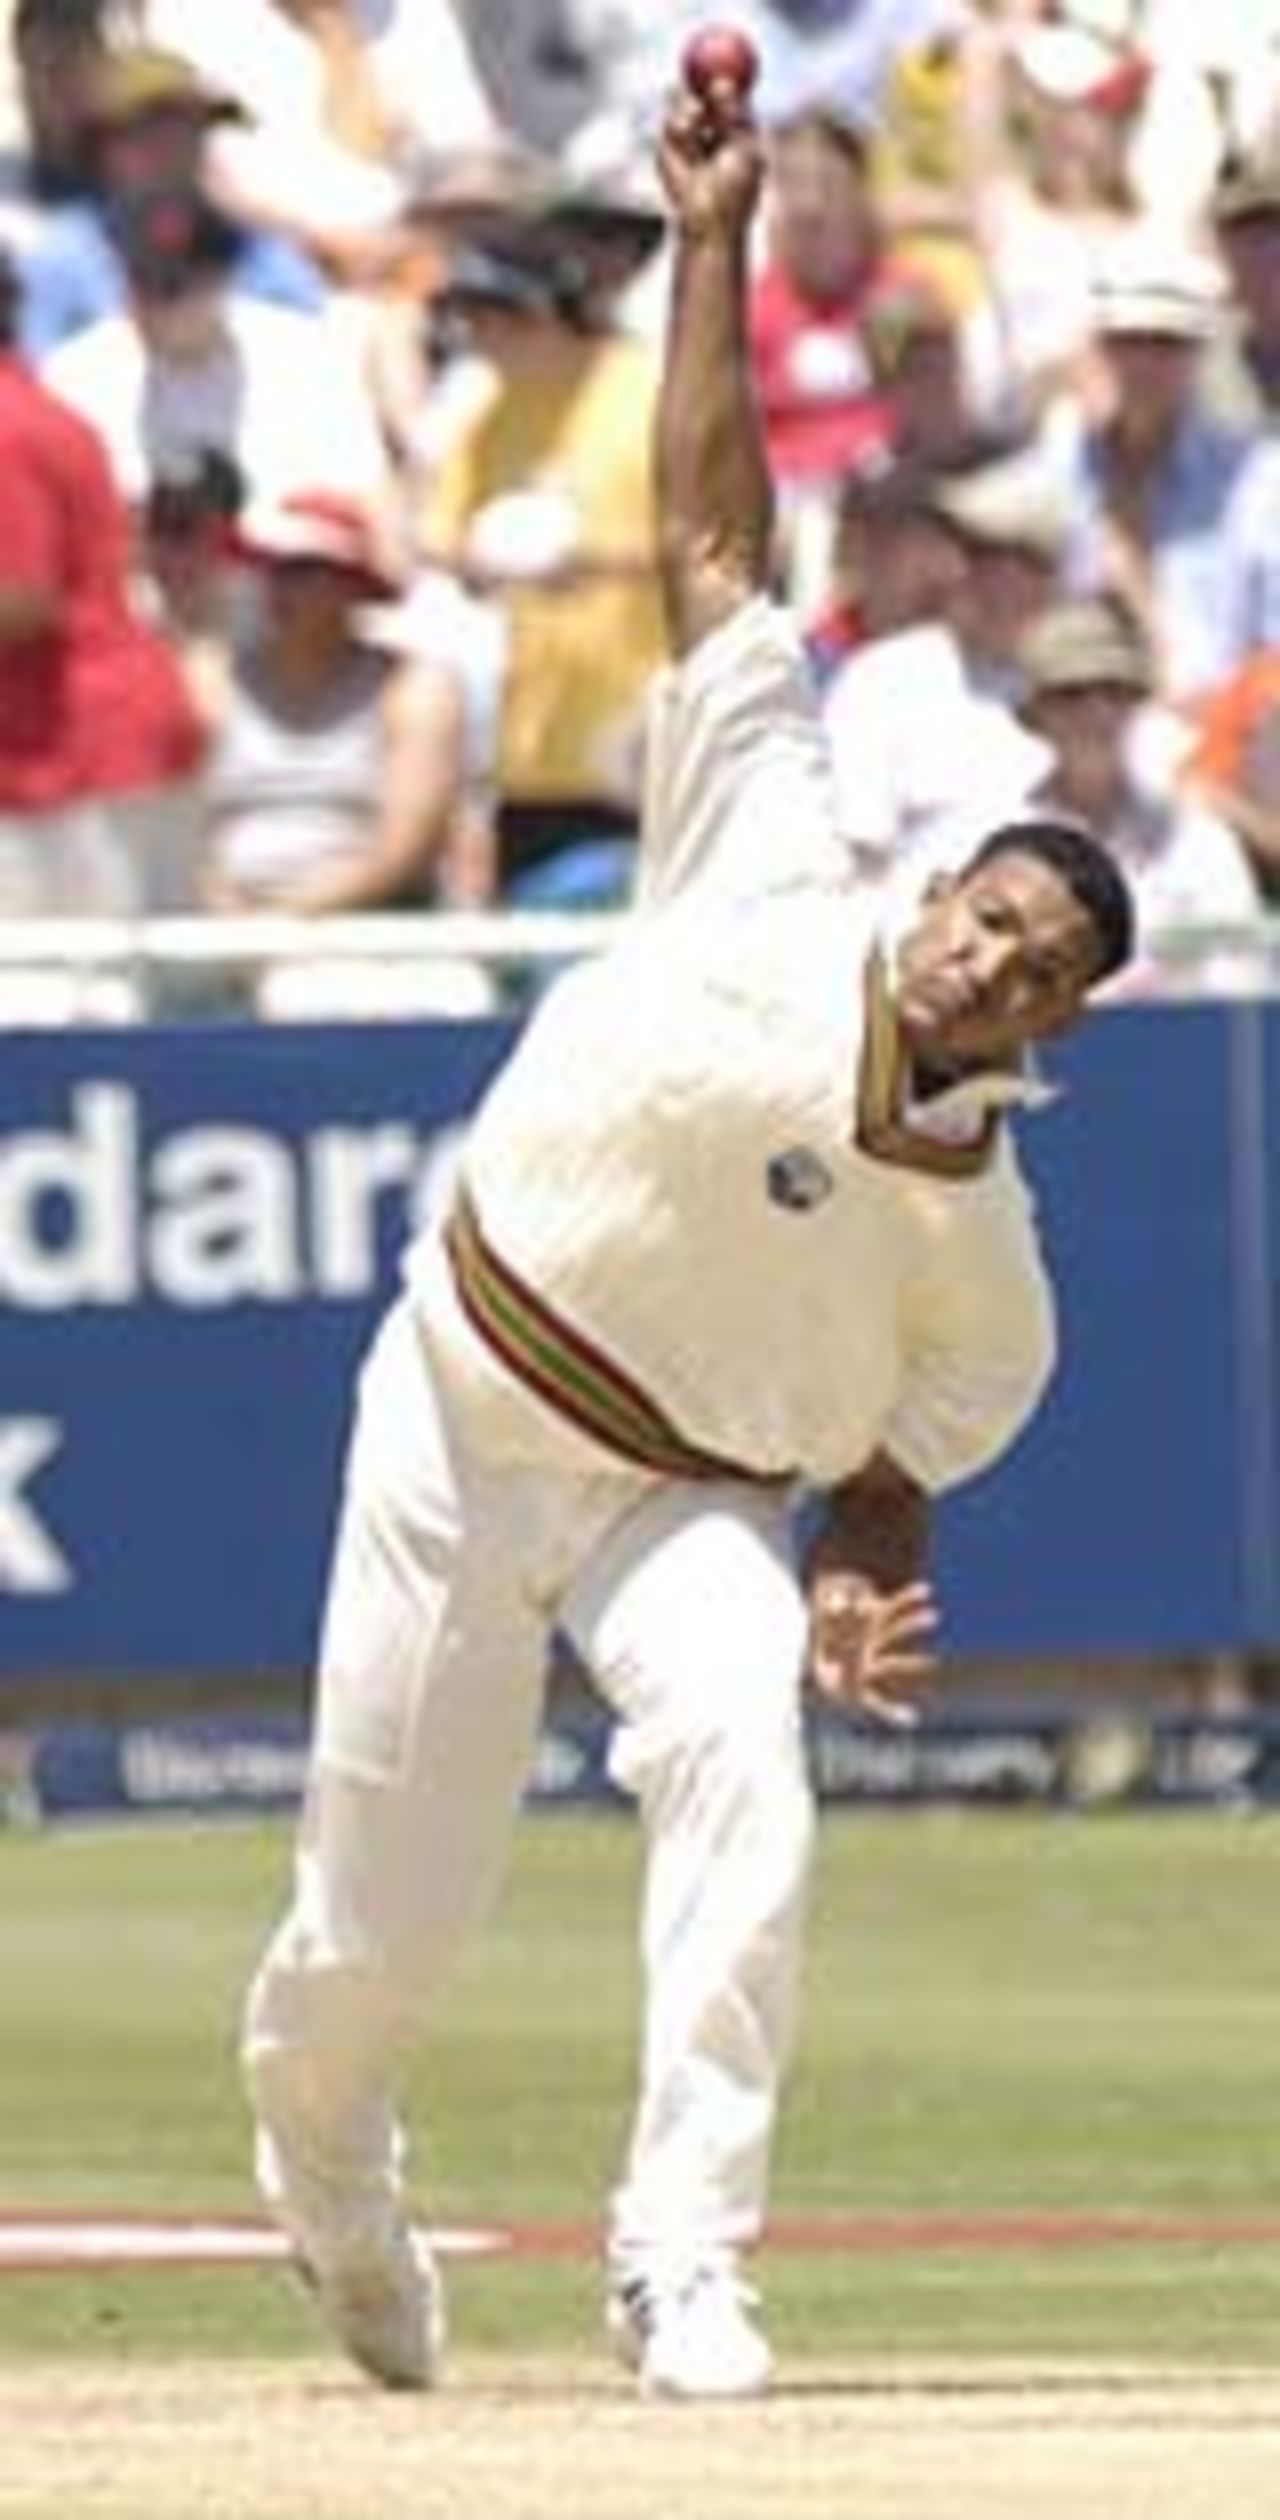 Adam Sanford, South Africa v West Indies, 3rd Test, Cape Town, January 2, 2003